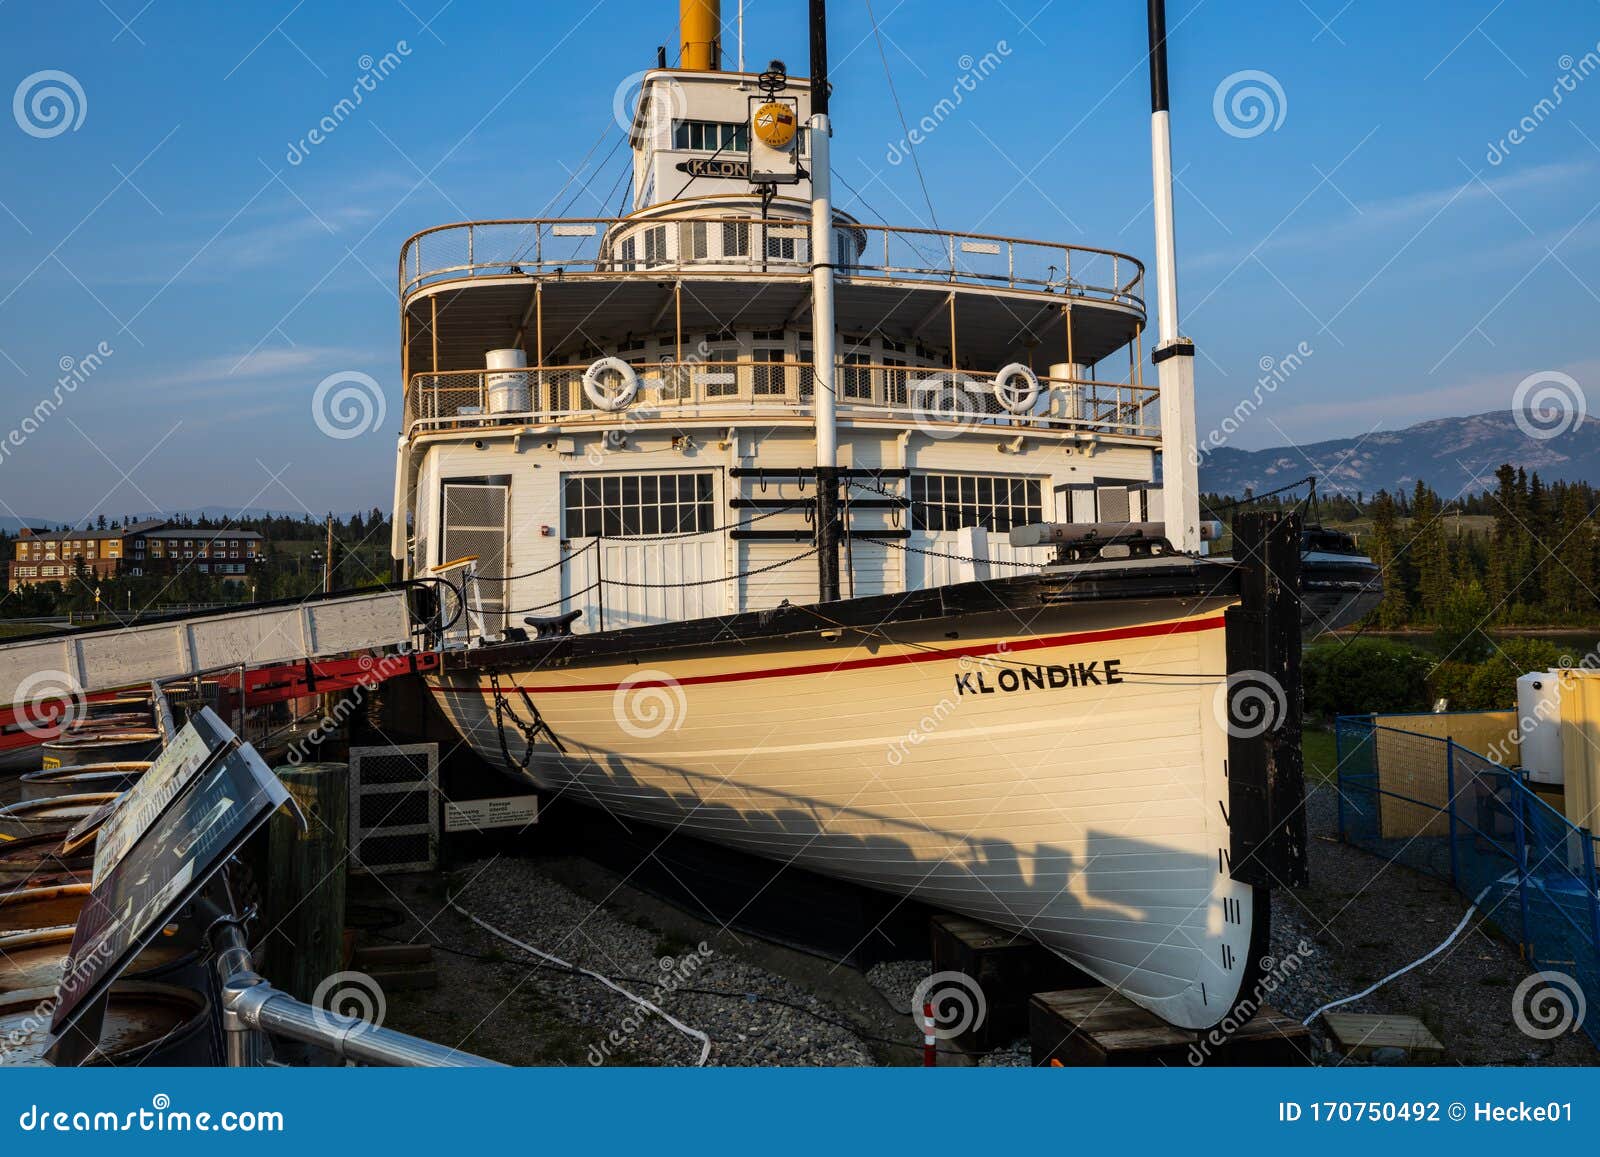 The S.S. Klondike In Whitehorse In Canada Editorial 